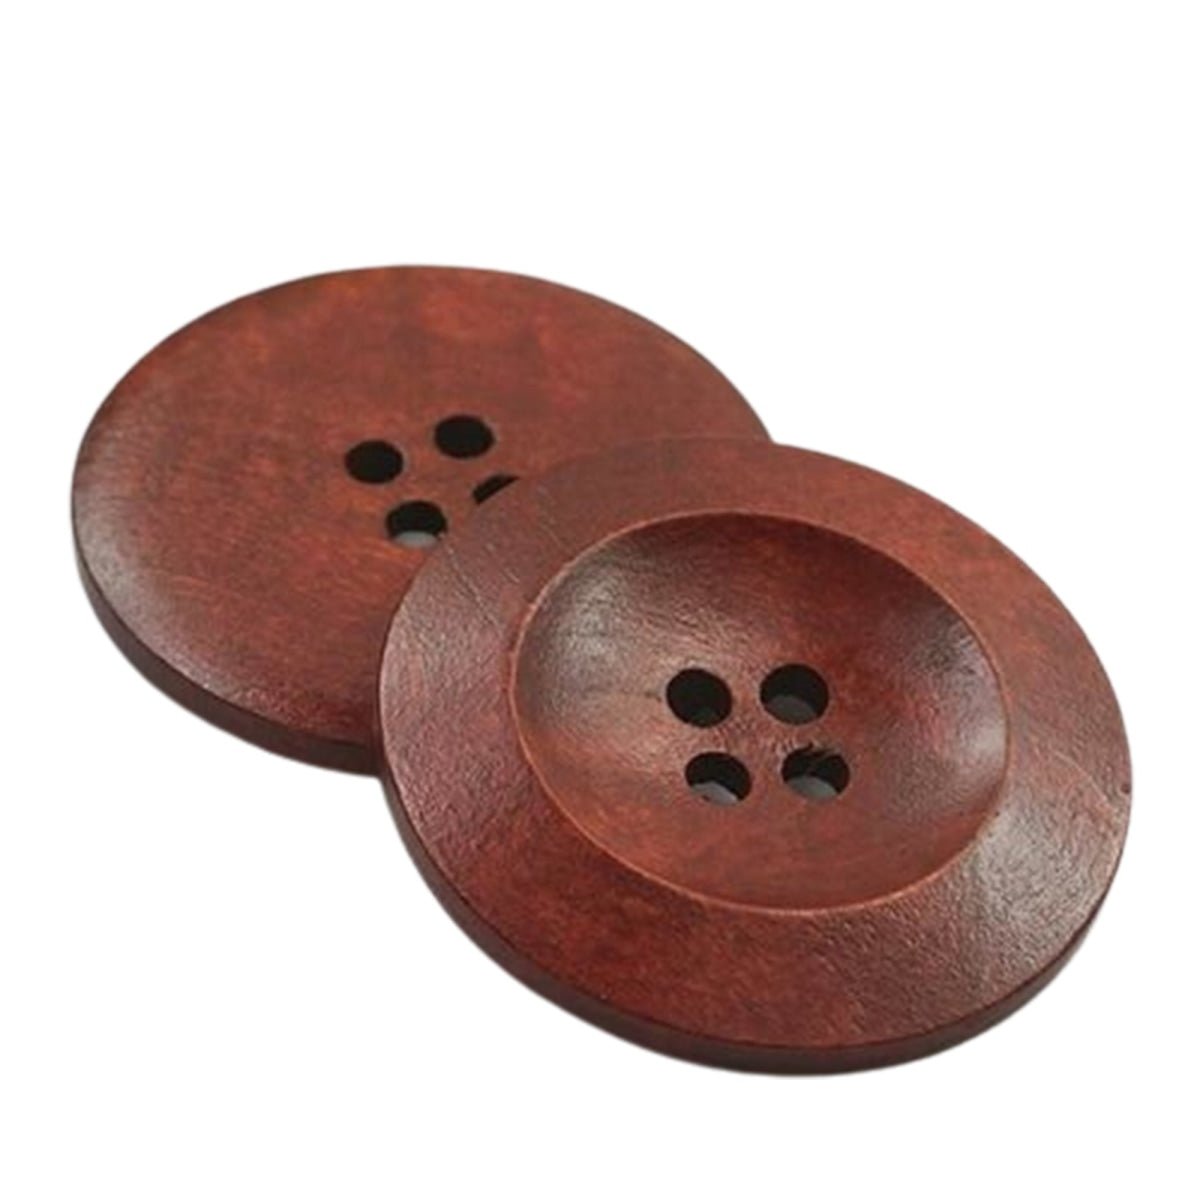 50pcs 15mm 20mm 25mm 30mm 35mm 4 Hole Wooden Buttons Sewing Round Wood Button For Clothes Coat Handmade - 25mm Coffee Colour - - Asia Sell